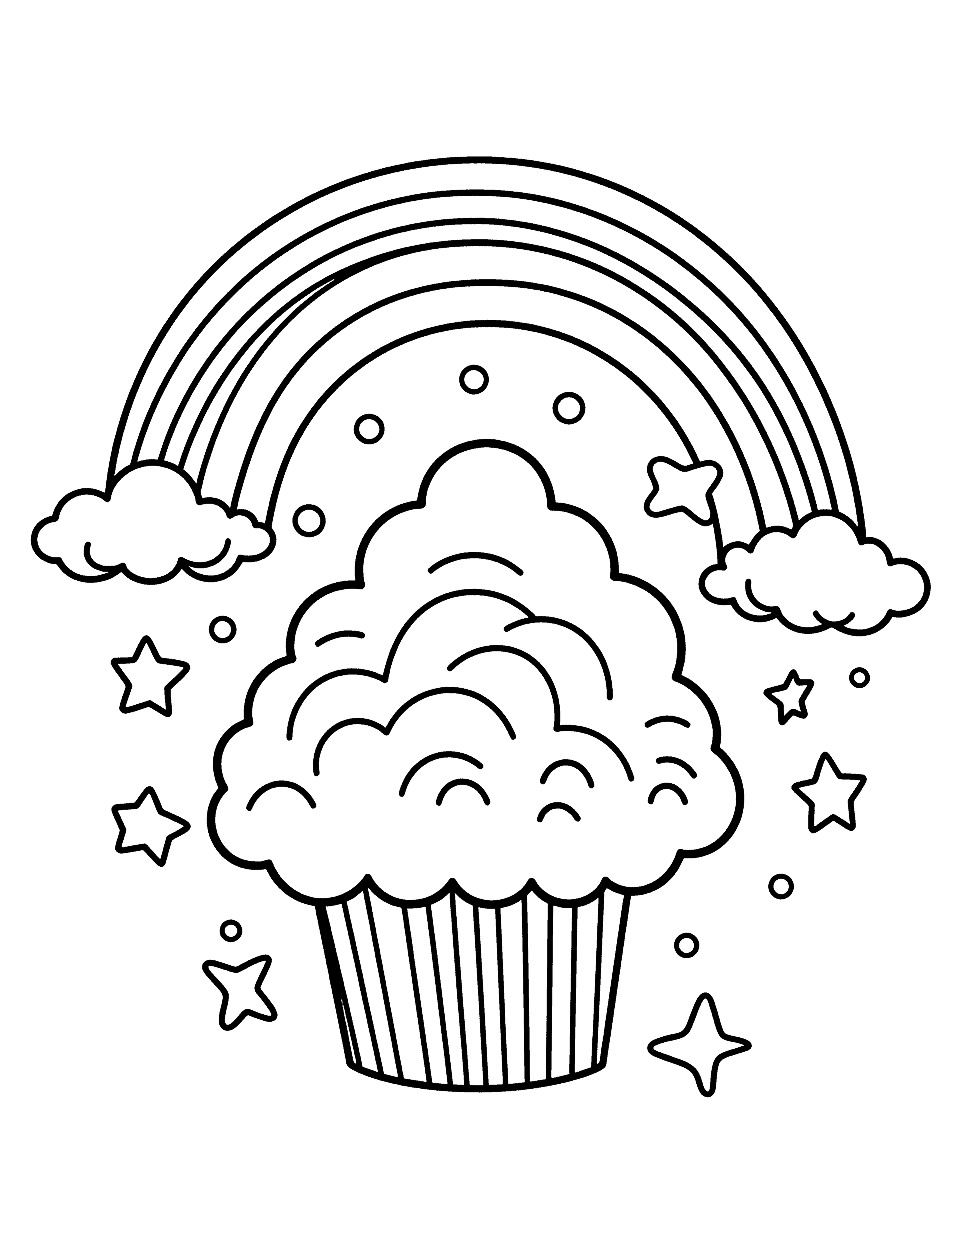 Rainbow Cupcake Coloring Page - A mouth-watering cupcake with rainbow-colored frosting.